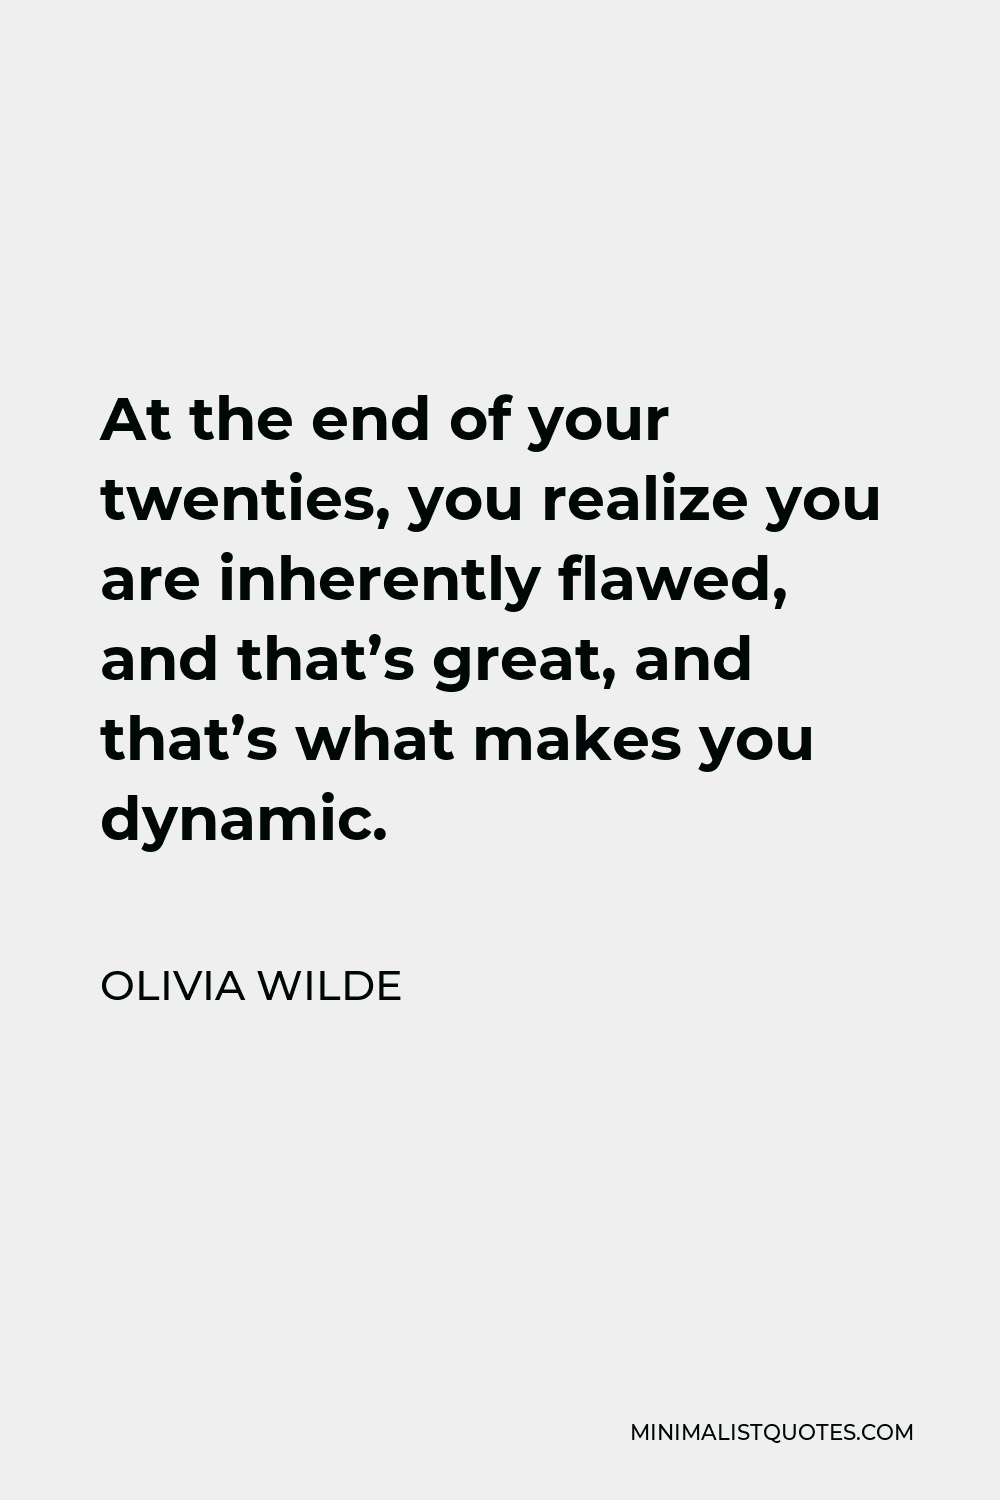 Olivia Wilde Quote - At the end of your twenties, you realize you are inherently flawed, and that’s great, and that’s what makes you dynamic.